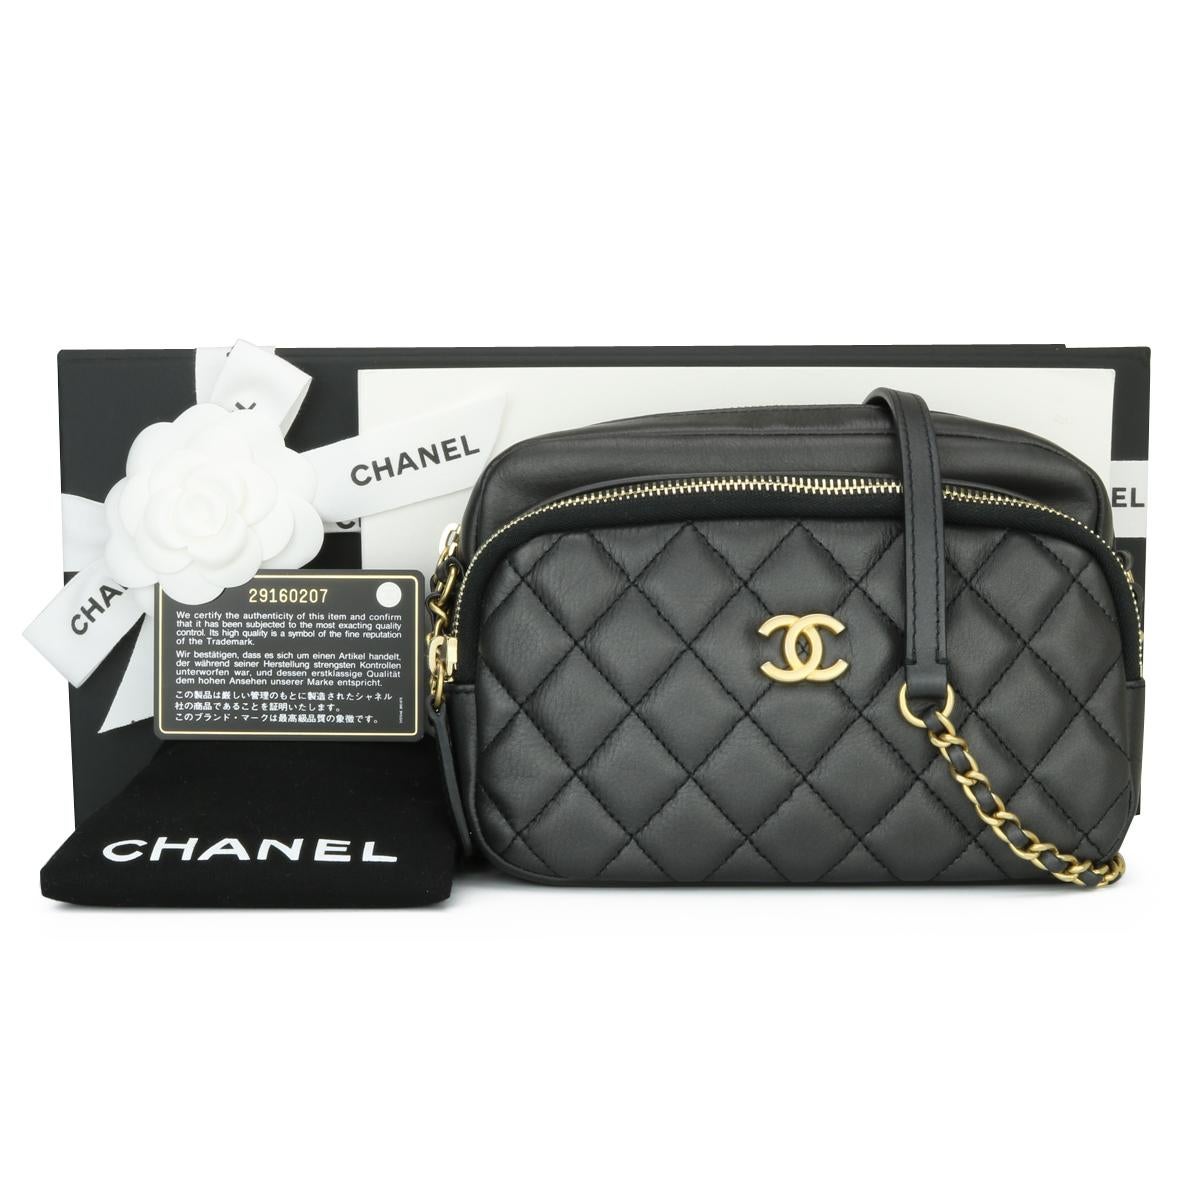 CHANEL Camera Case Black Calfskin with Brushed Gold Hardware 2020.

This stunning bag is in excellent condition, the bag still holds its original shape, and the hardware is still very shiny.

Such a versatile bag! It can fit all your daily